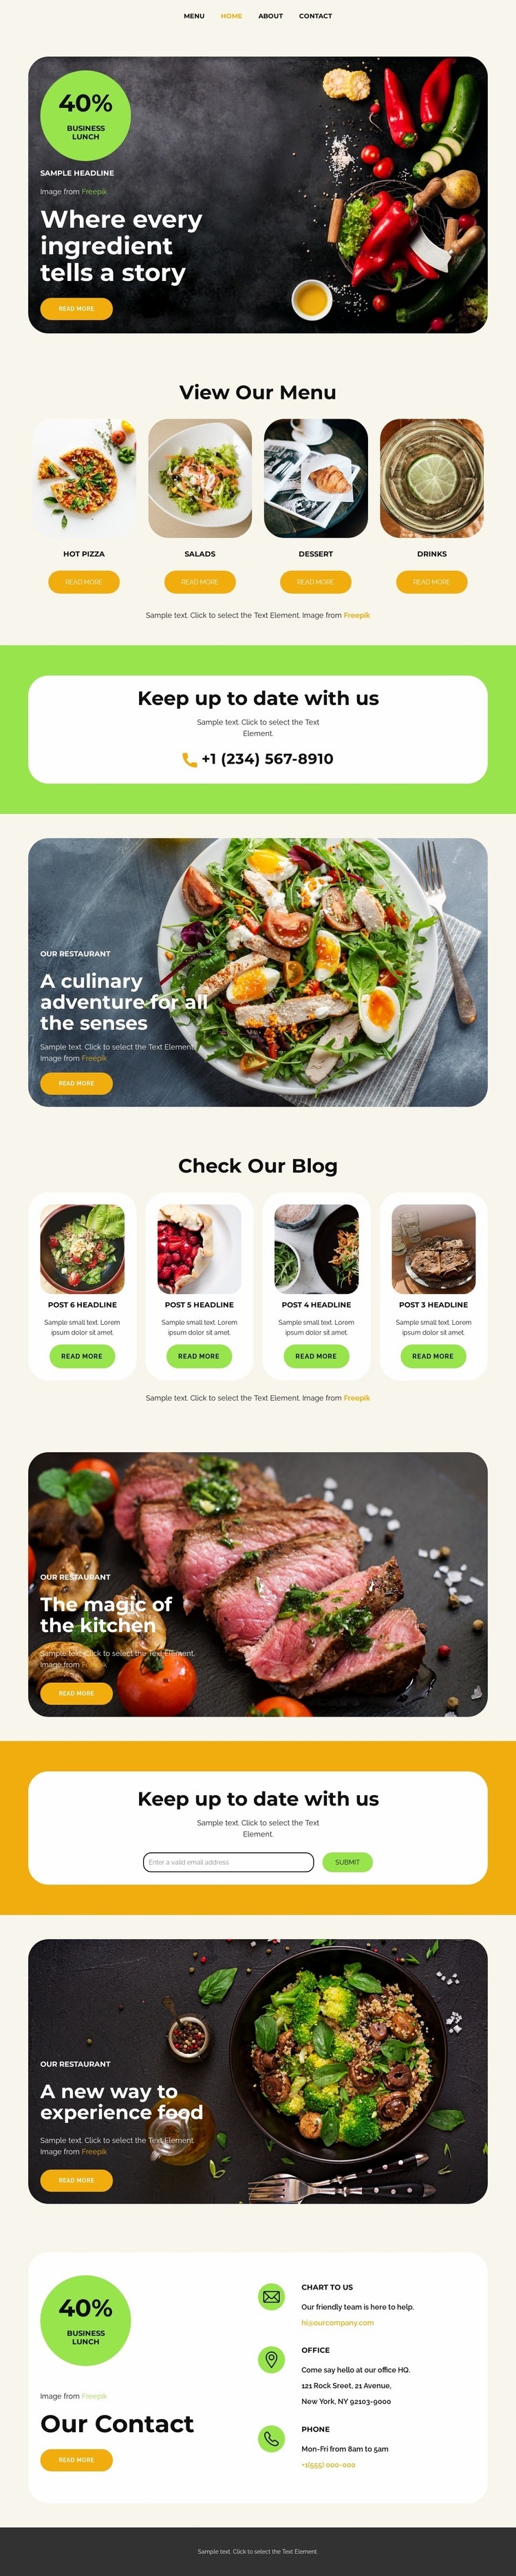 The magic of the kitchen Web Page Design